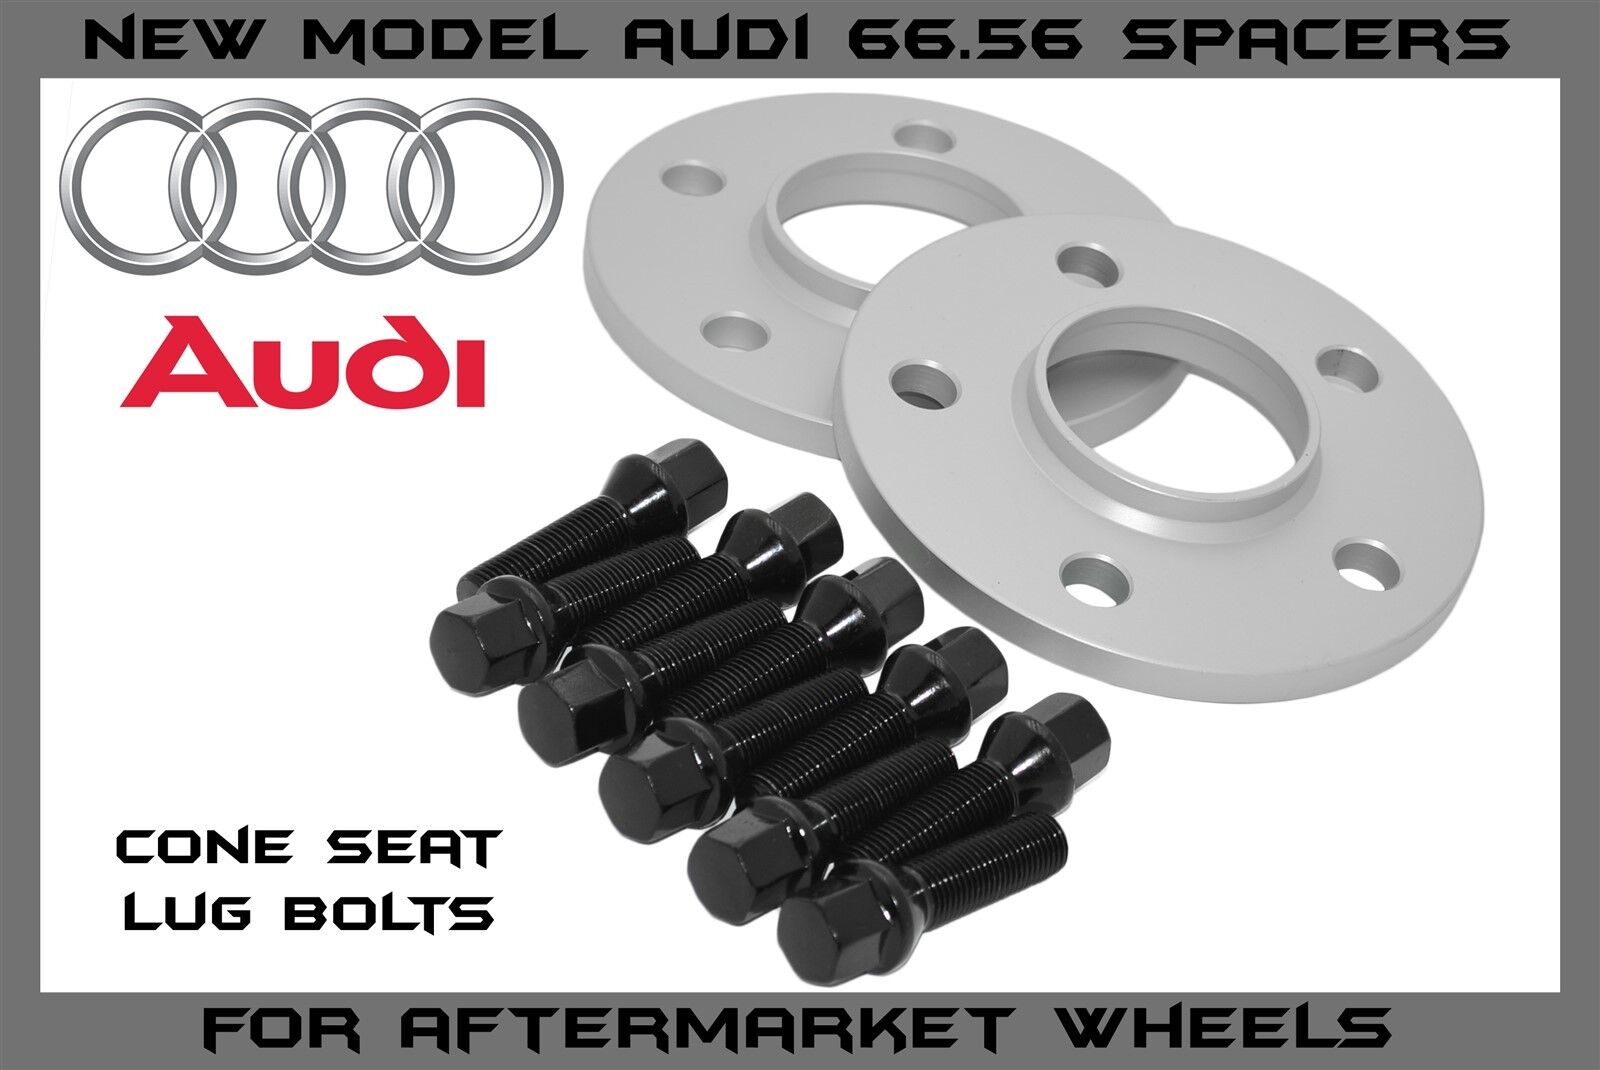 15mm Audi 5x112 66.56 Wheel Spacers Black Fits: A4 A5 A6 S4 S5 2009-2016 Conical